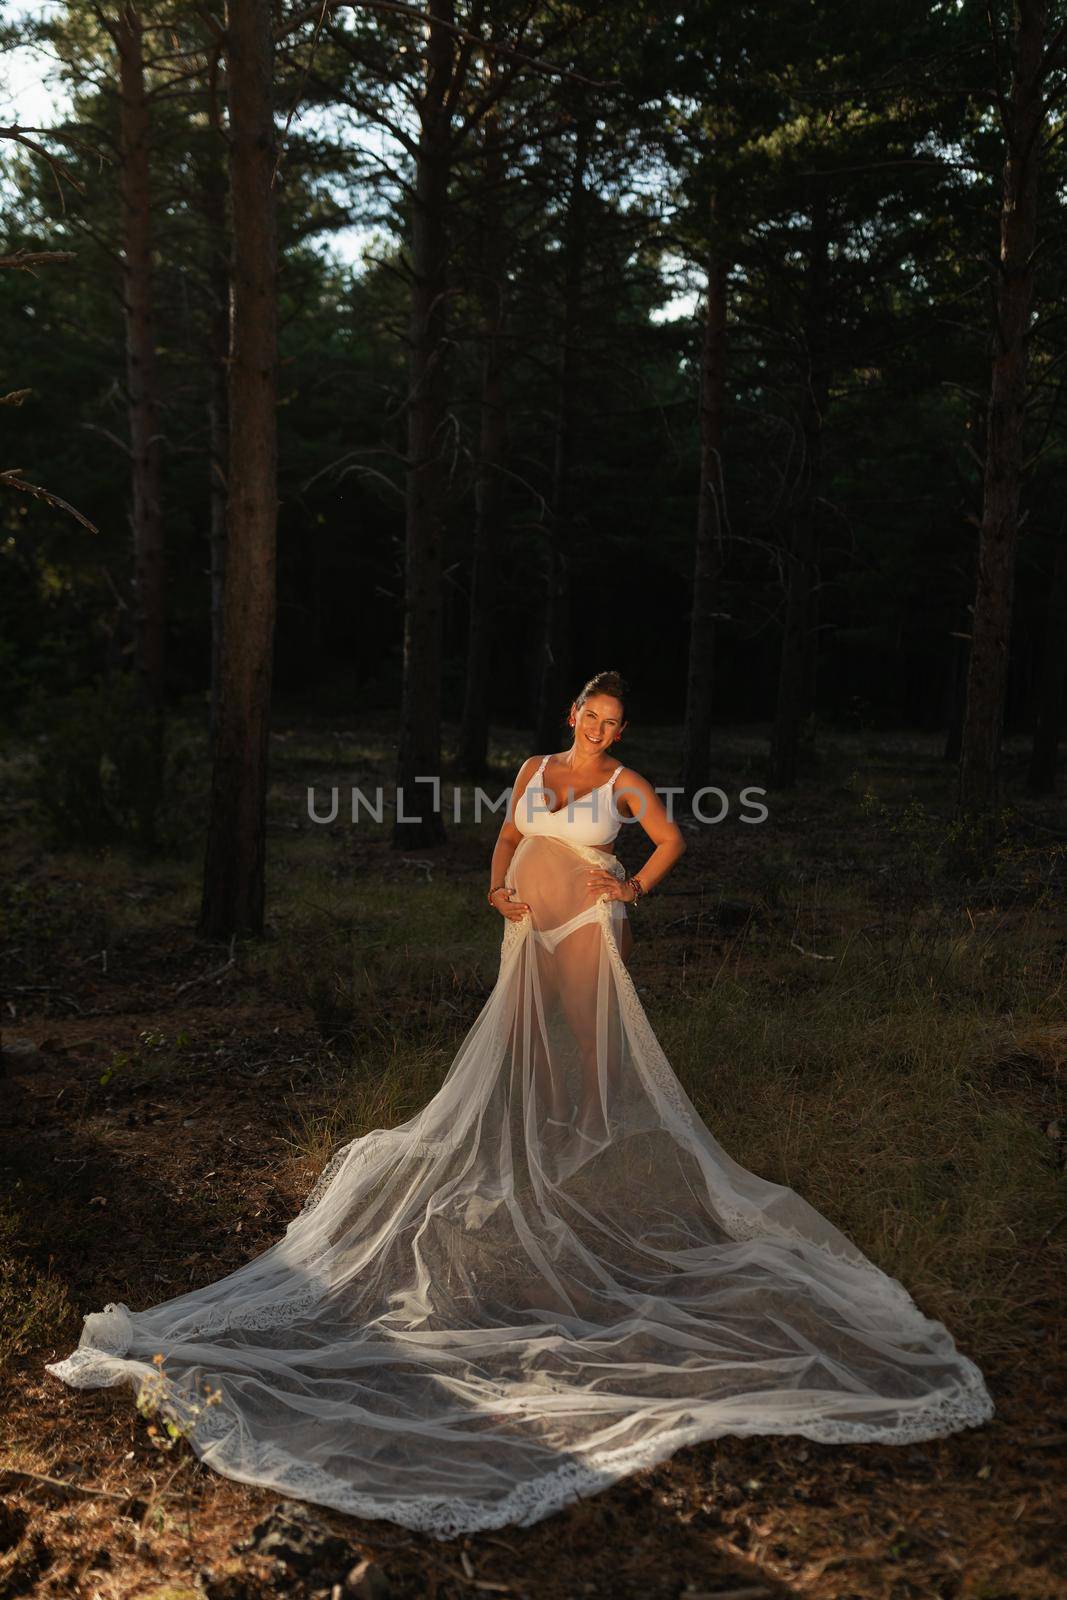 A pregnant woman poses caressing her belly wearing part of her wedding dress by stockrojoverdeyazul